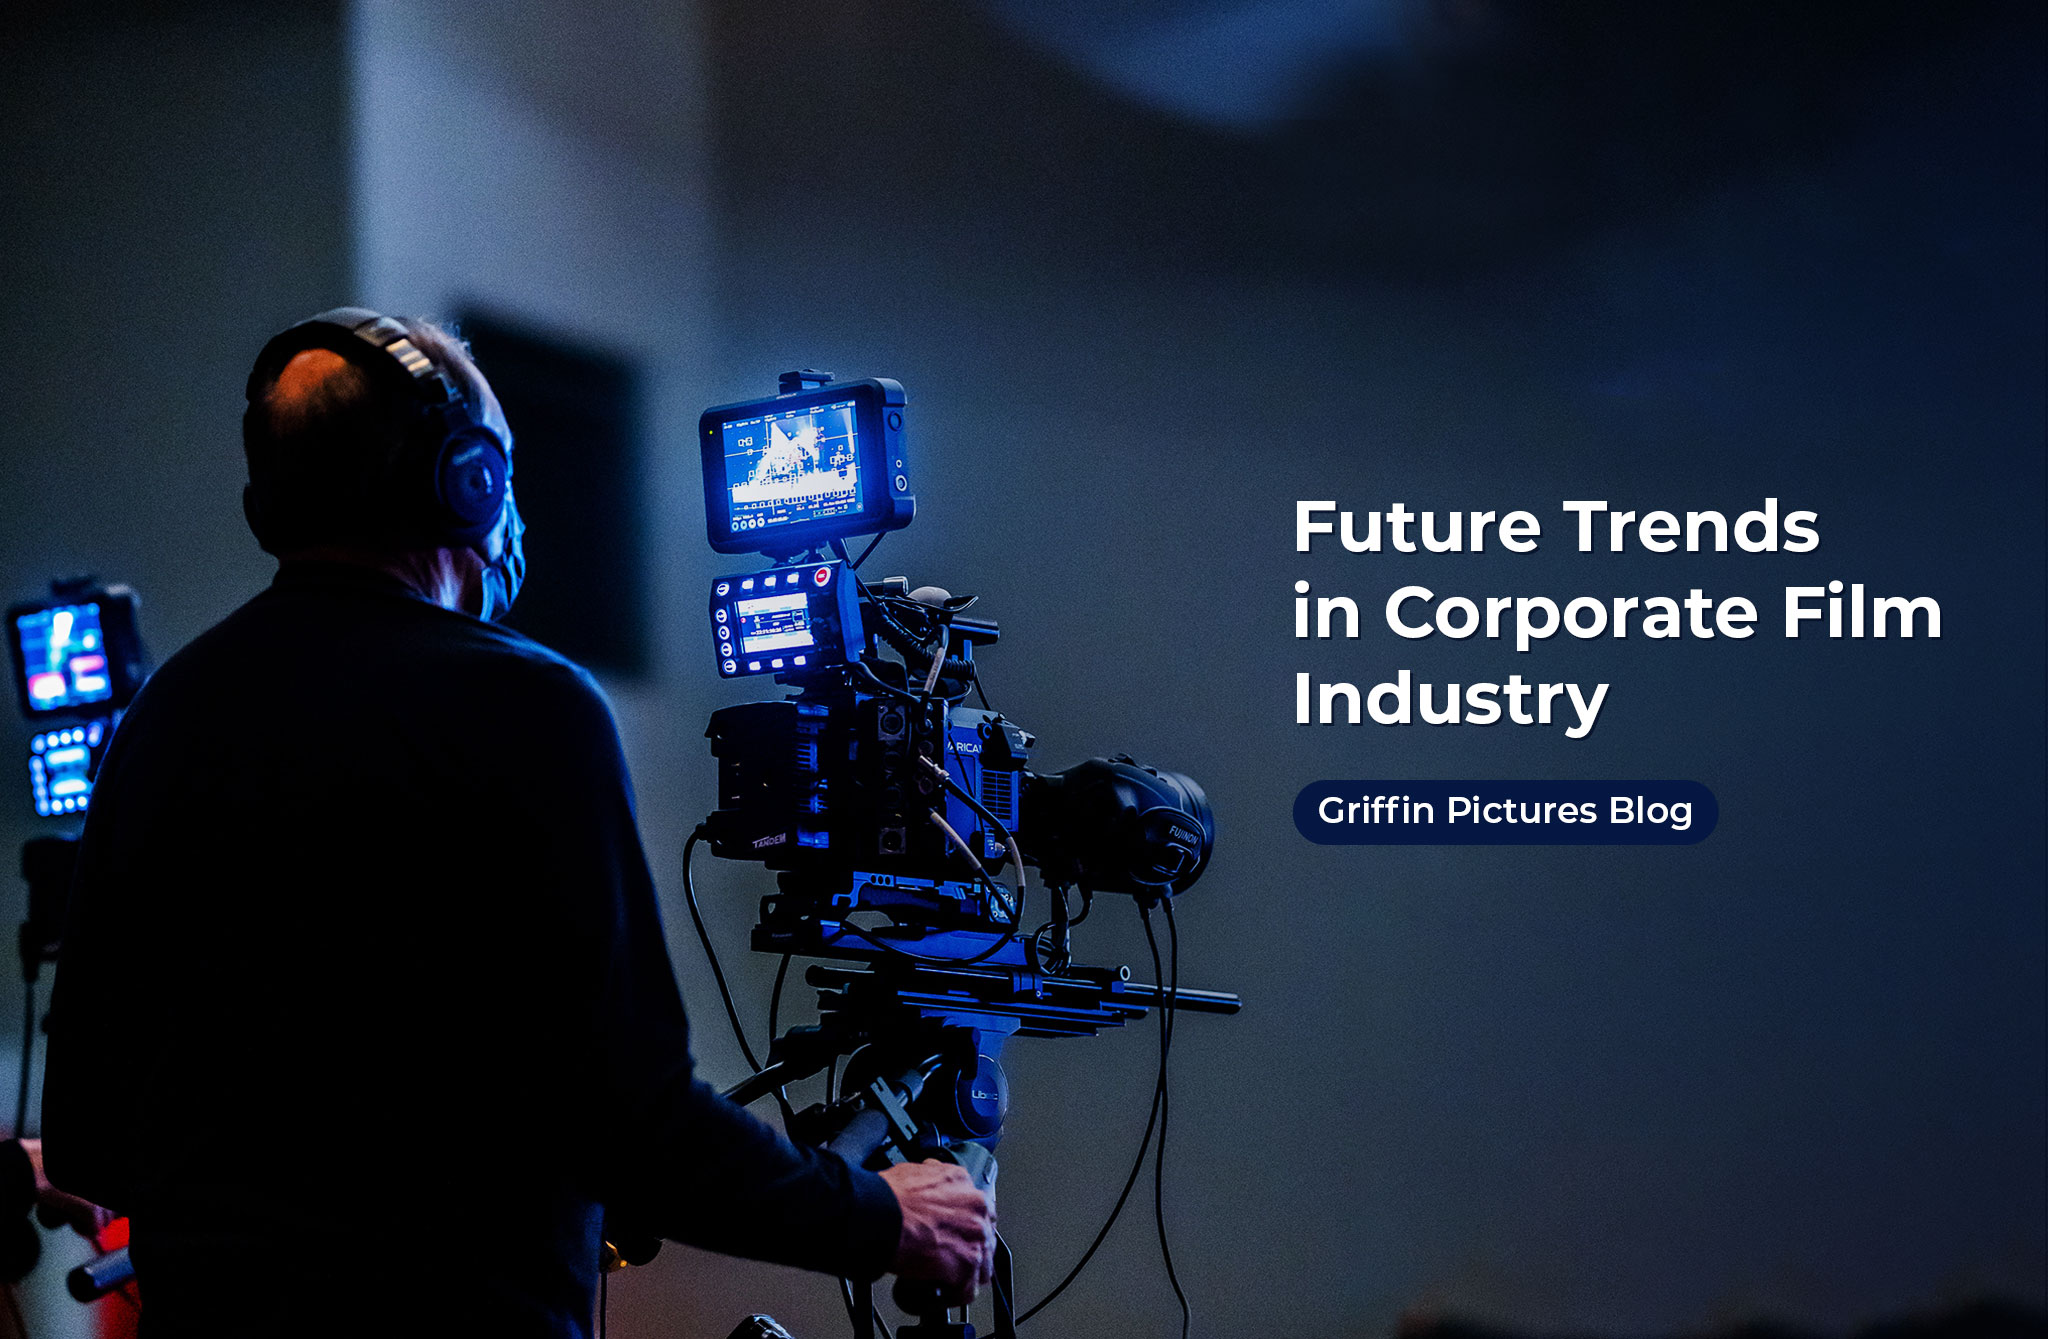 What Are Some Corporate Film Industry's Future Trends